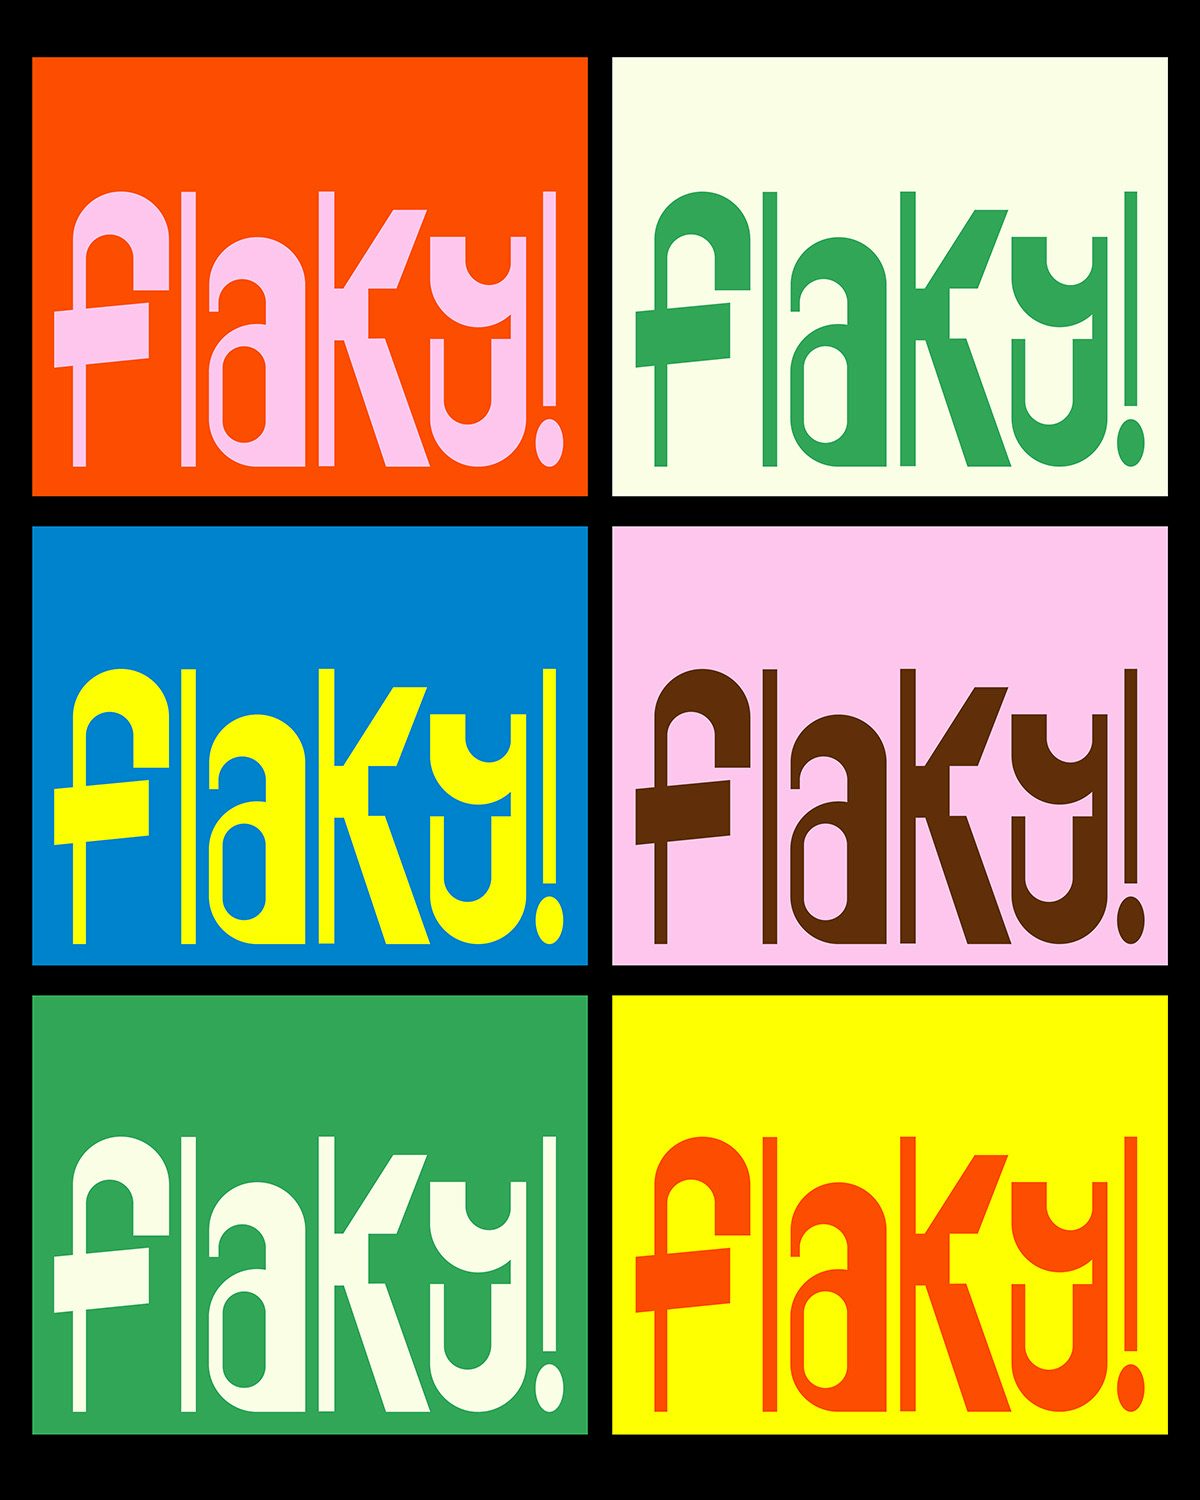 Flaky's rebranding was intended to evoke a strong sense of joy and capture the essence of Denai Moore's childhood memories of Jamaican patty shops.